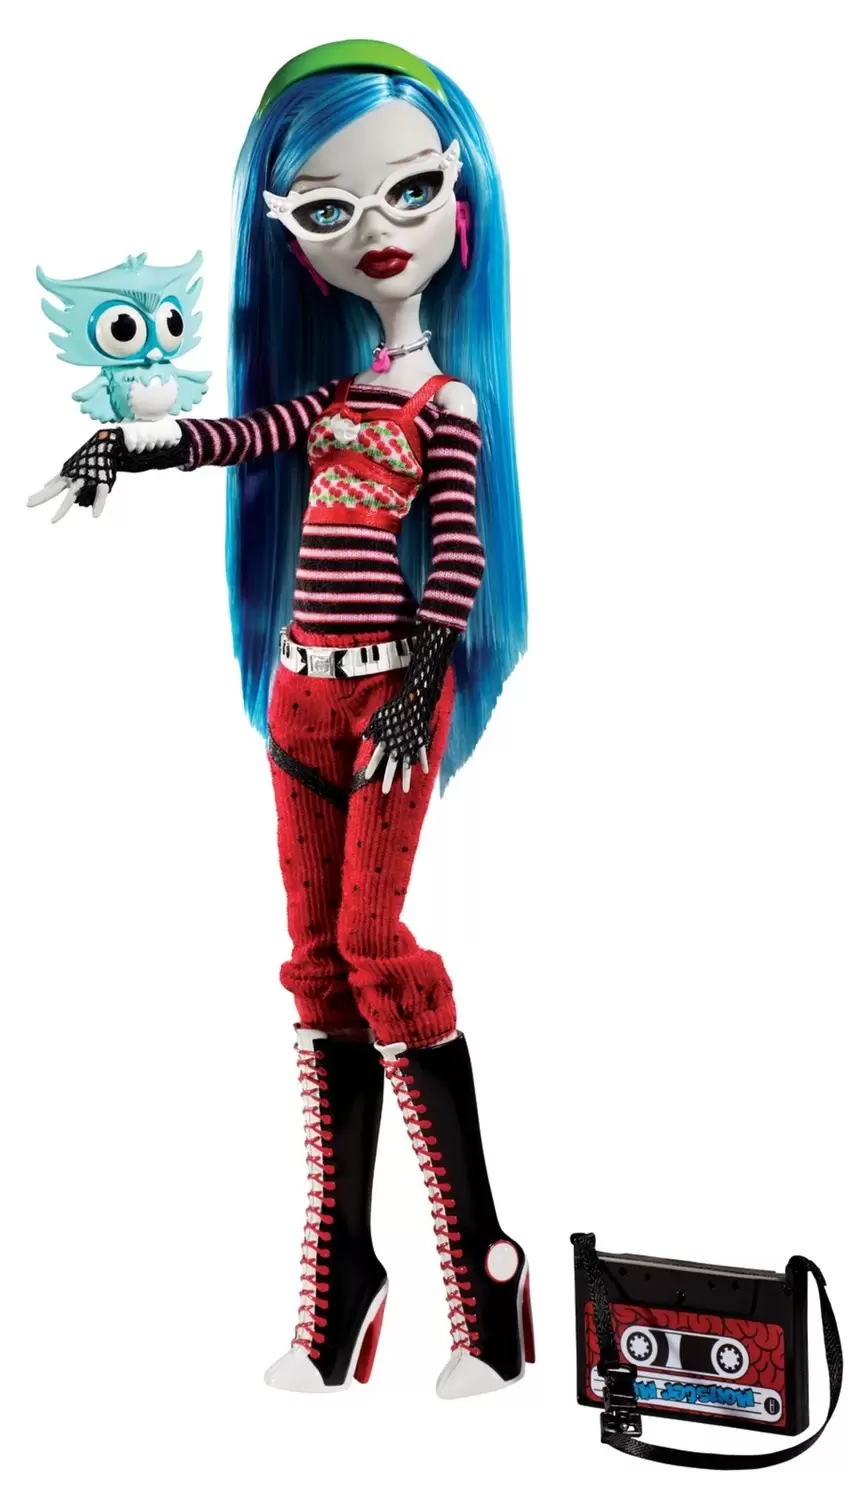 https://thumbs.coleka.com/media/item/201708/22/poupees-monster-high-ghoulia-yelps-fille-de-zombies-basic-010.webp